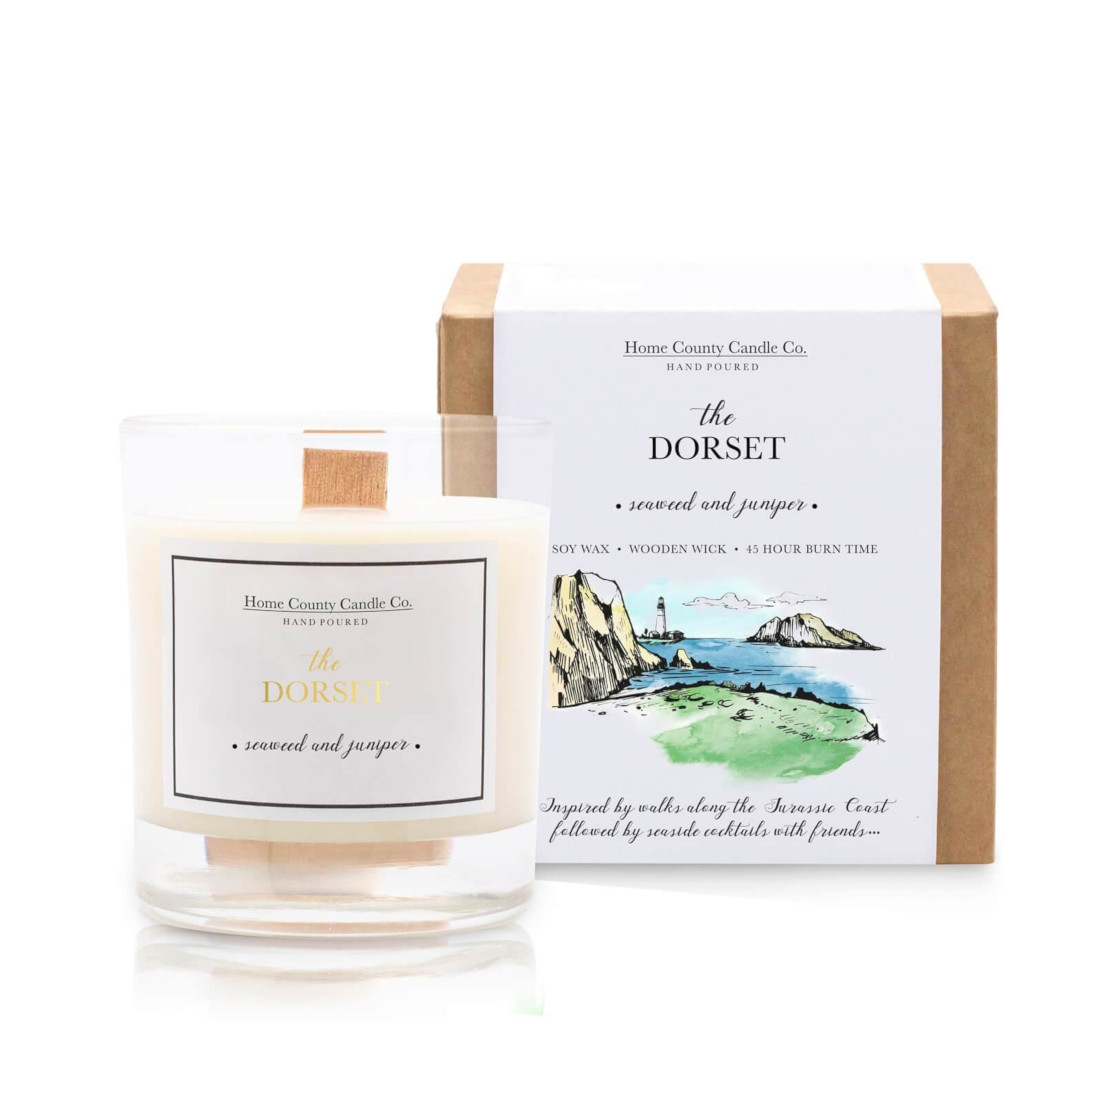 Home County Candle Dorset 200g Soy Candle